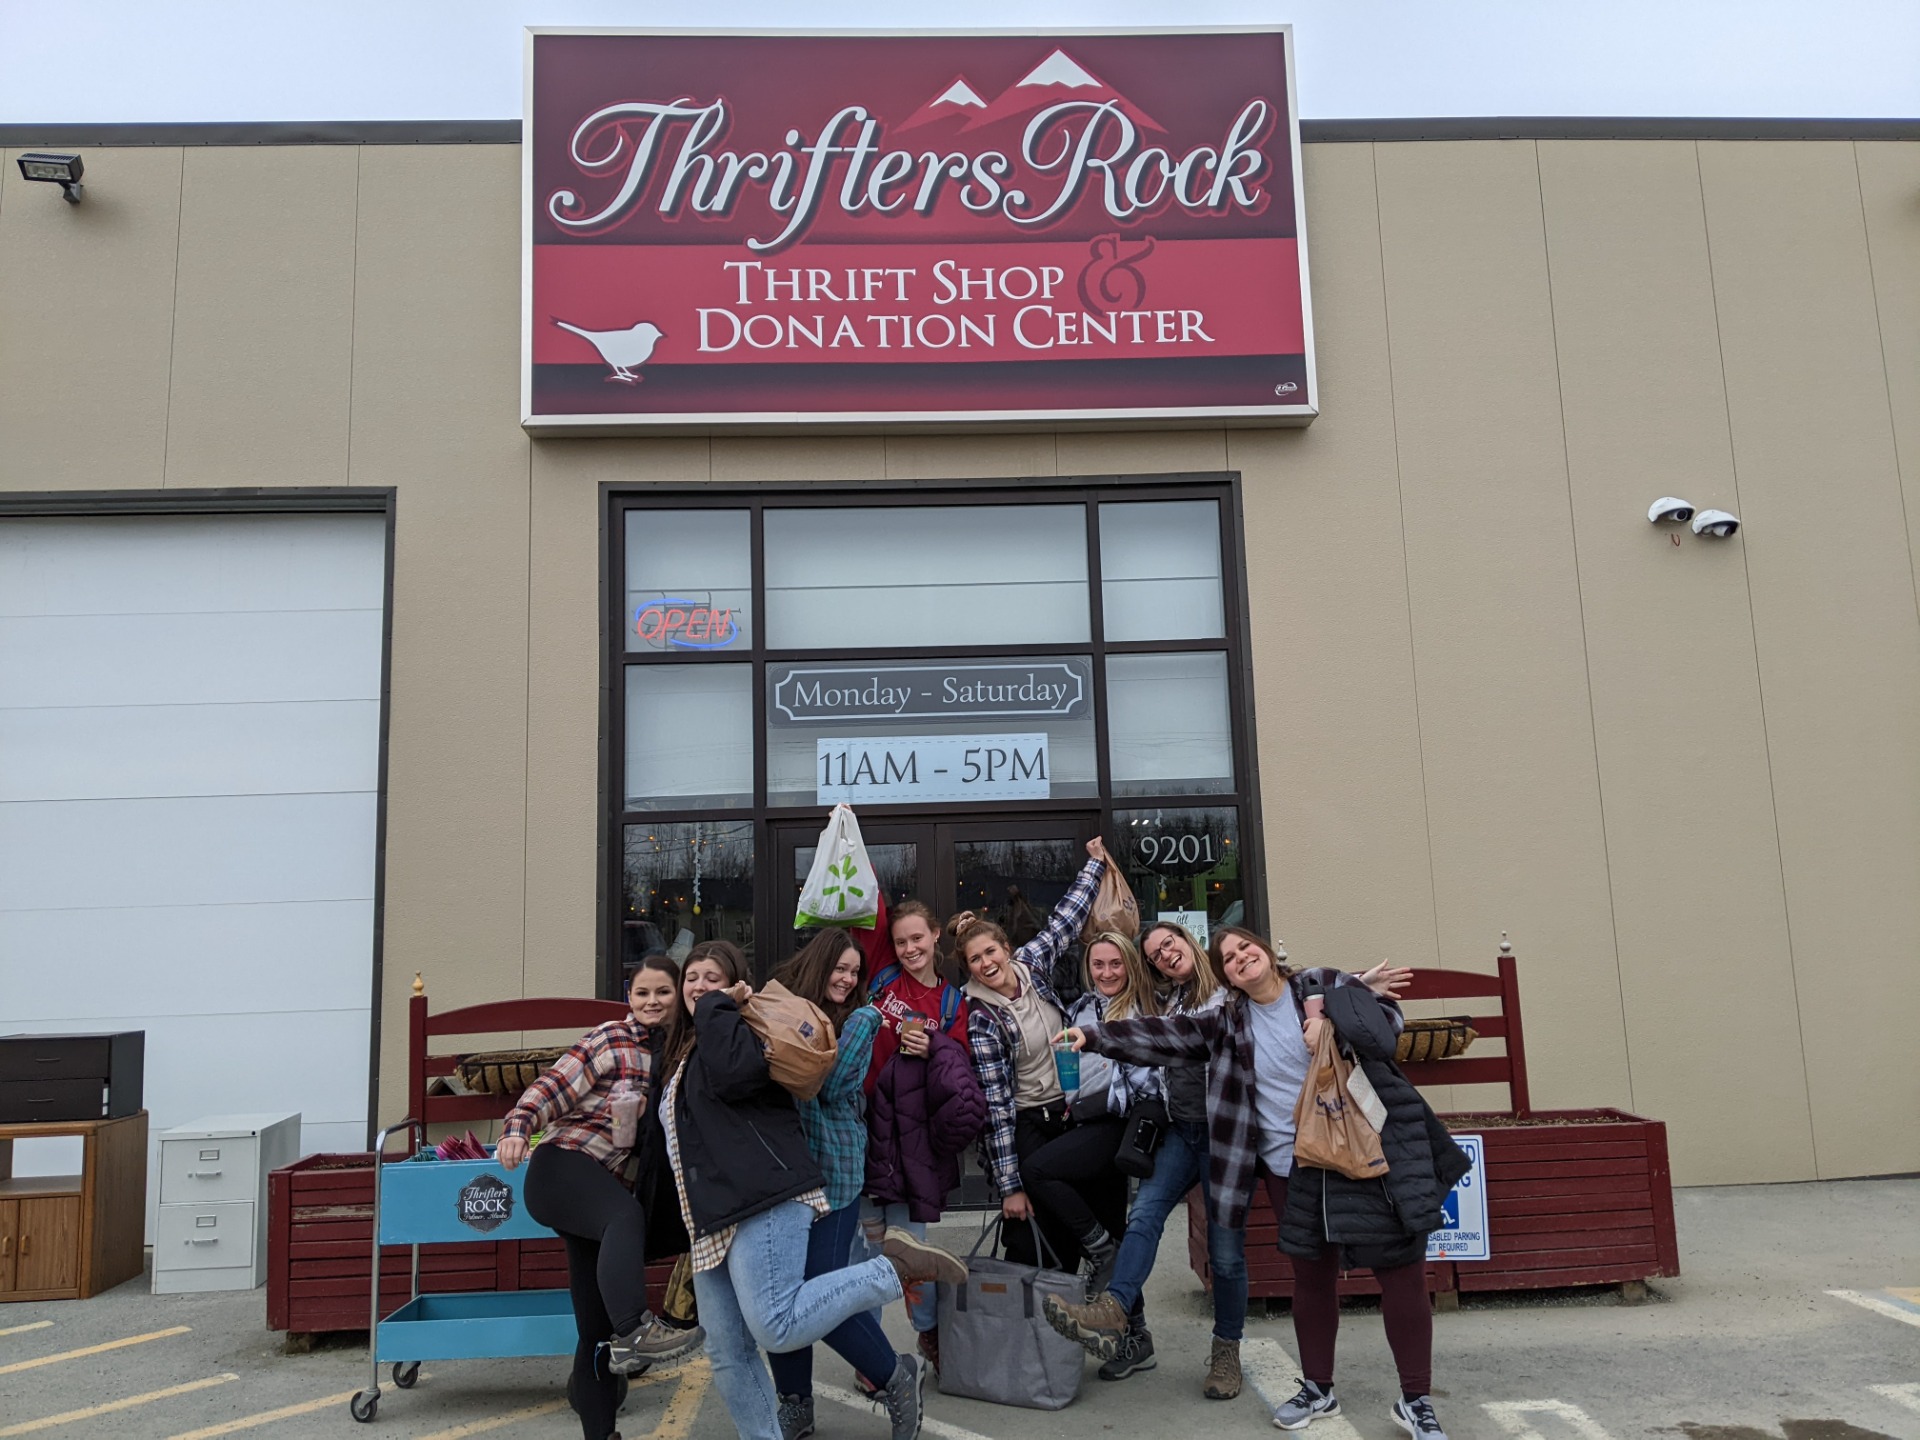 Thrifters Rock